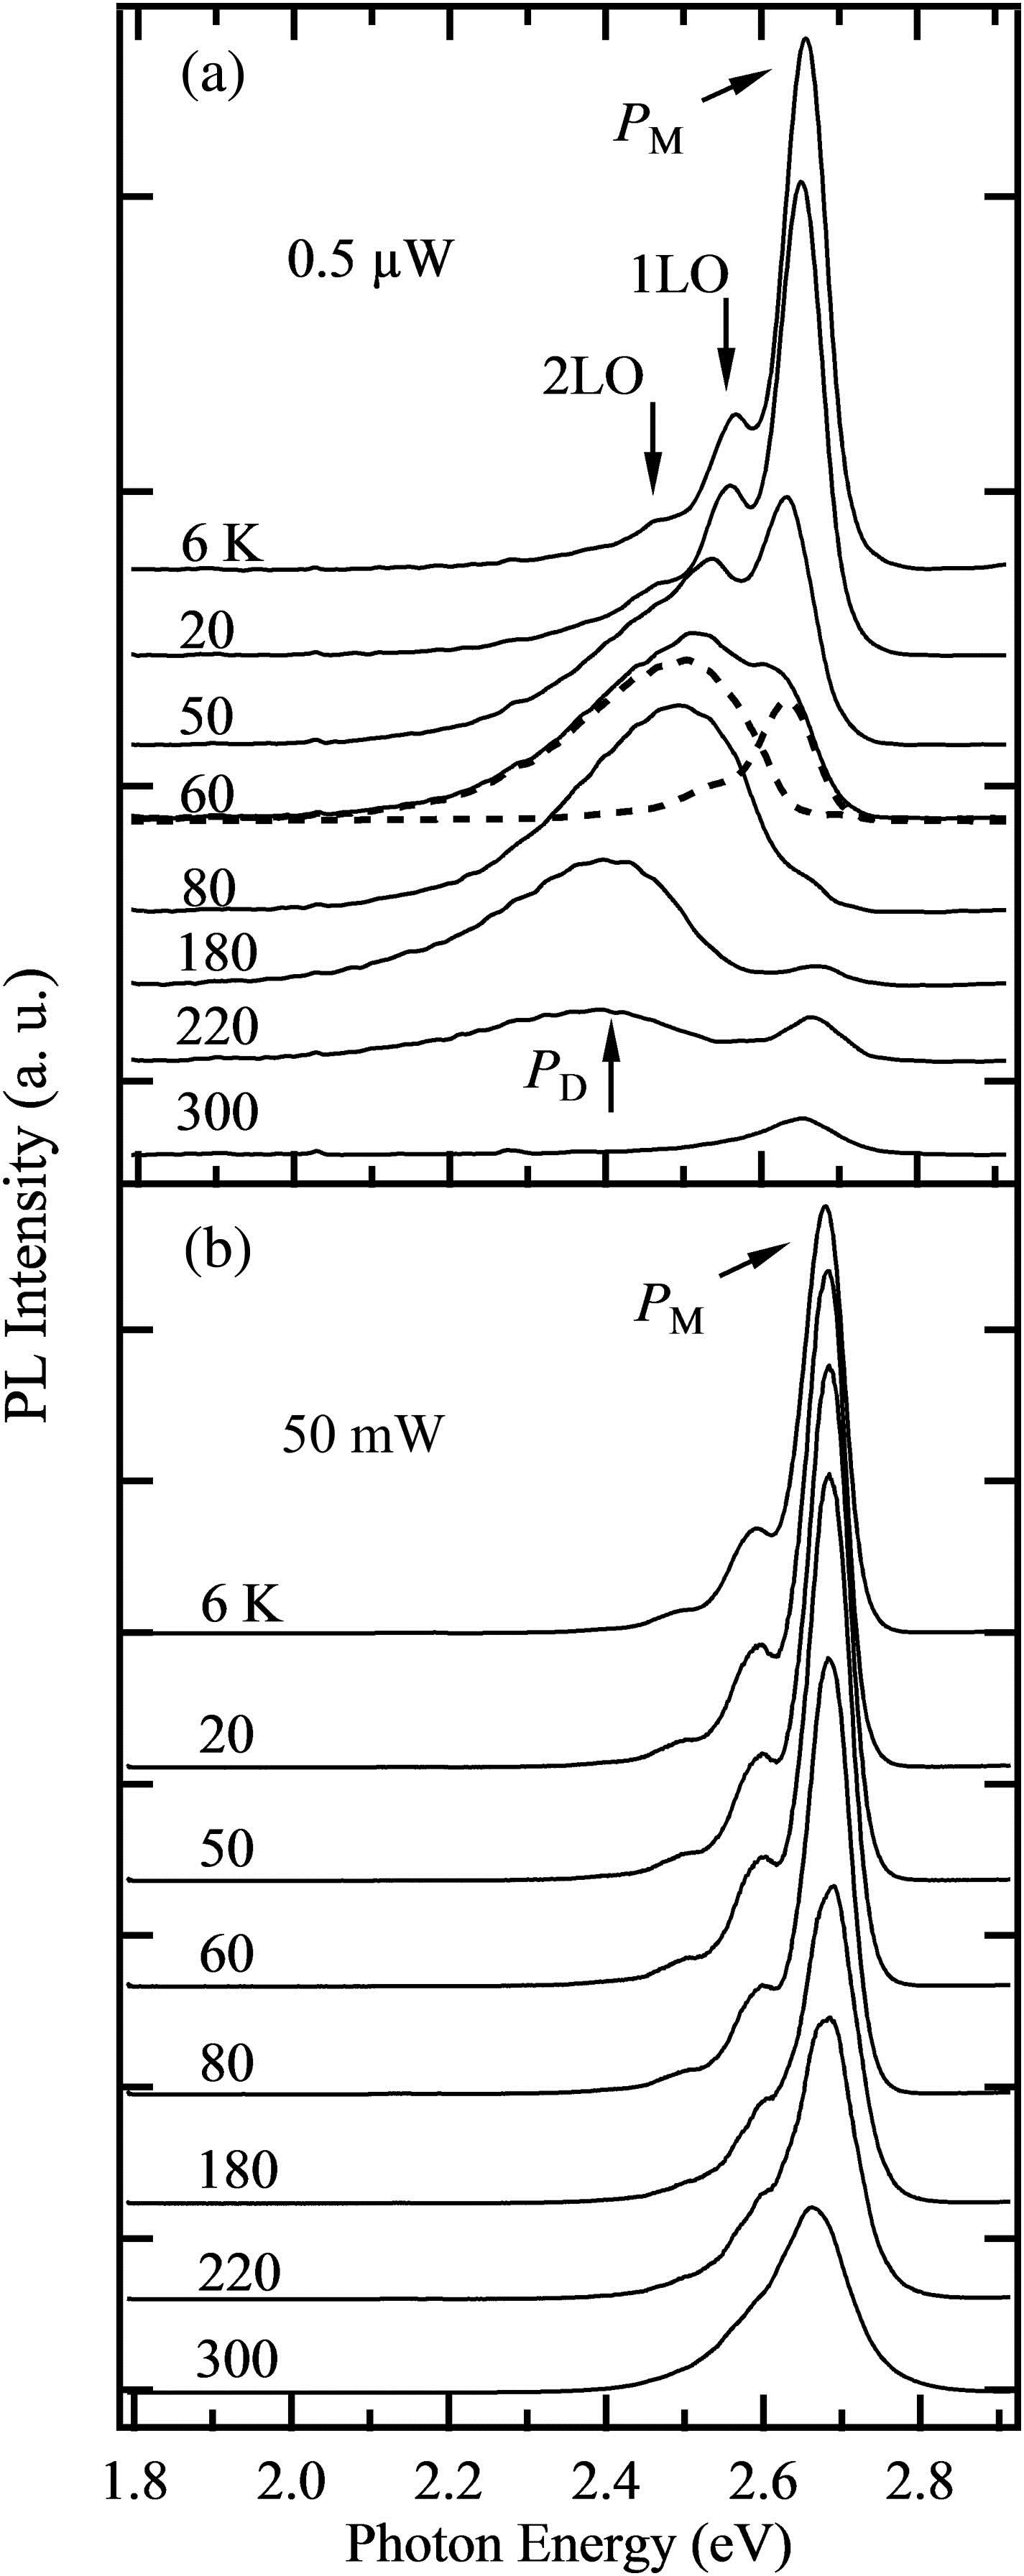 Temperature-dependent PL spectra of InGaN/GaN MQWs measured at (a) 0.5 μW and (b) 50 mW. The dashed lines indicate the separate InGaN matrix- and QD-related lines. Two weak peaks, denoted by 1LO and 2LO, are phonon replicas of the main PM peak.